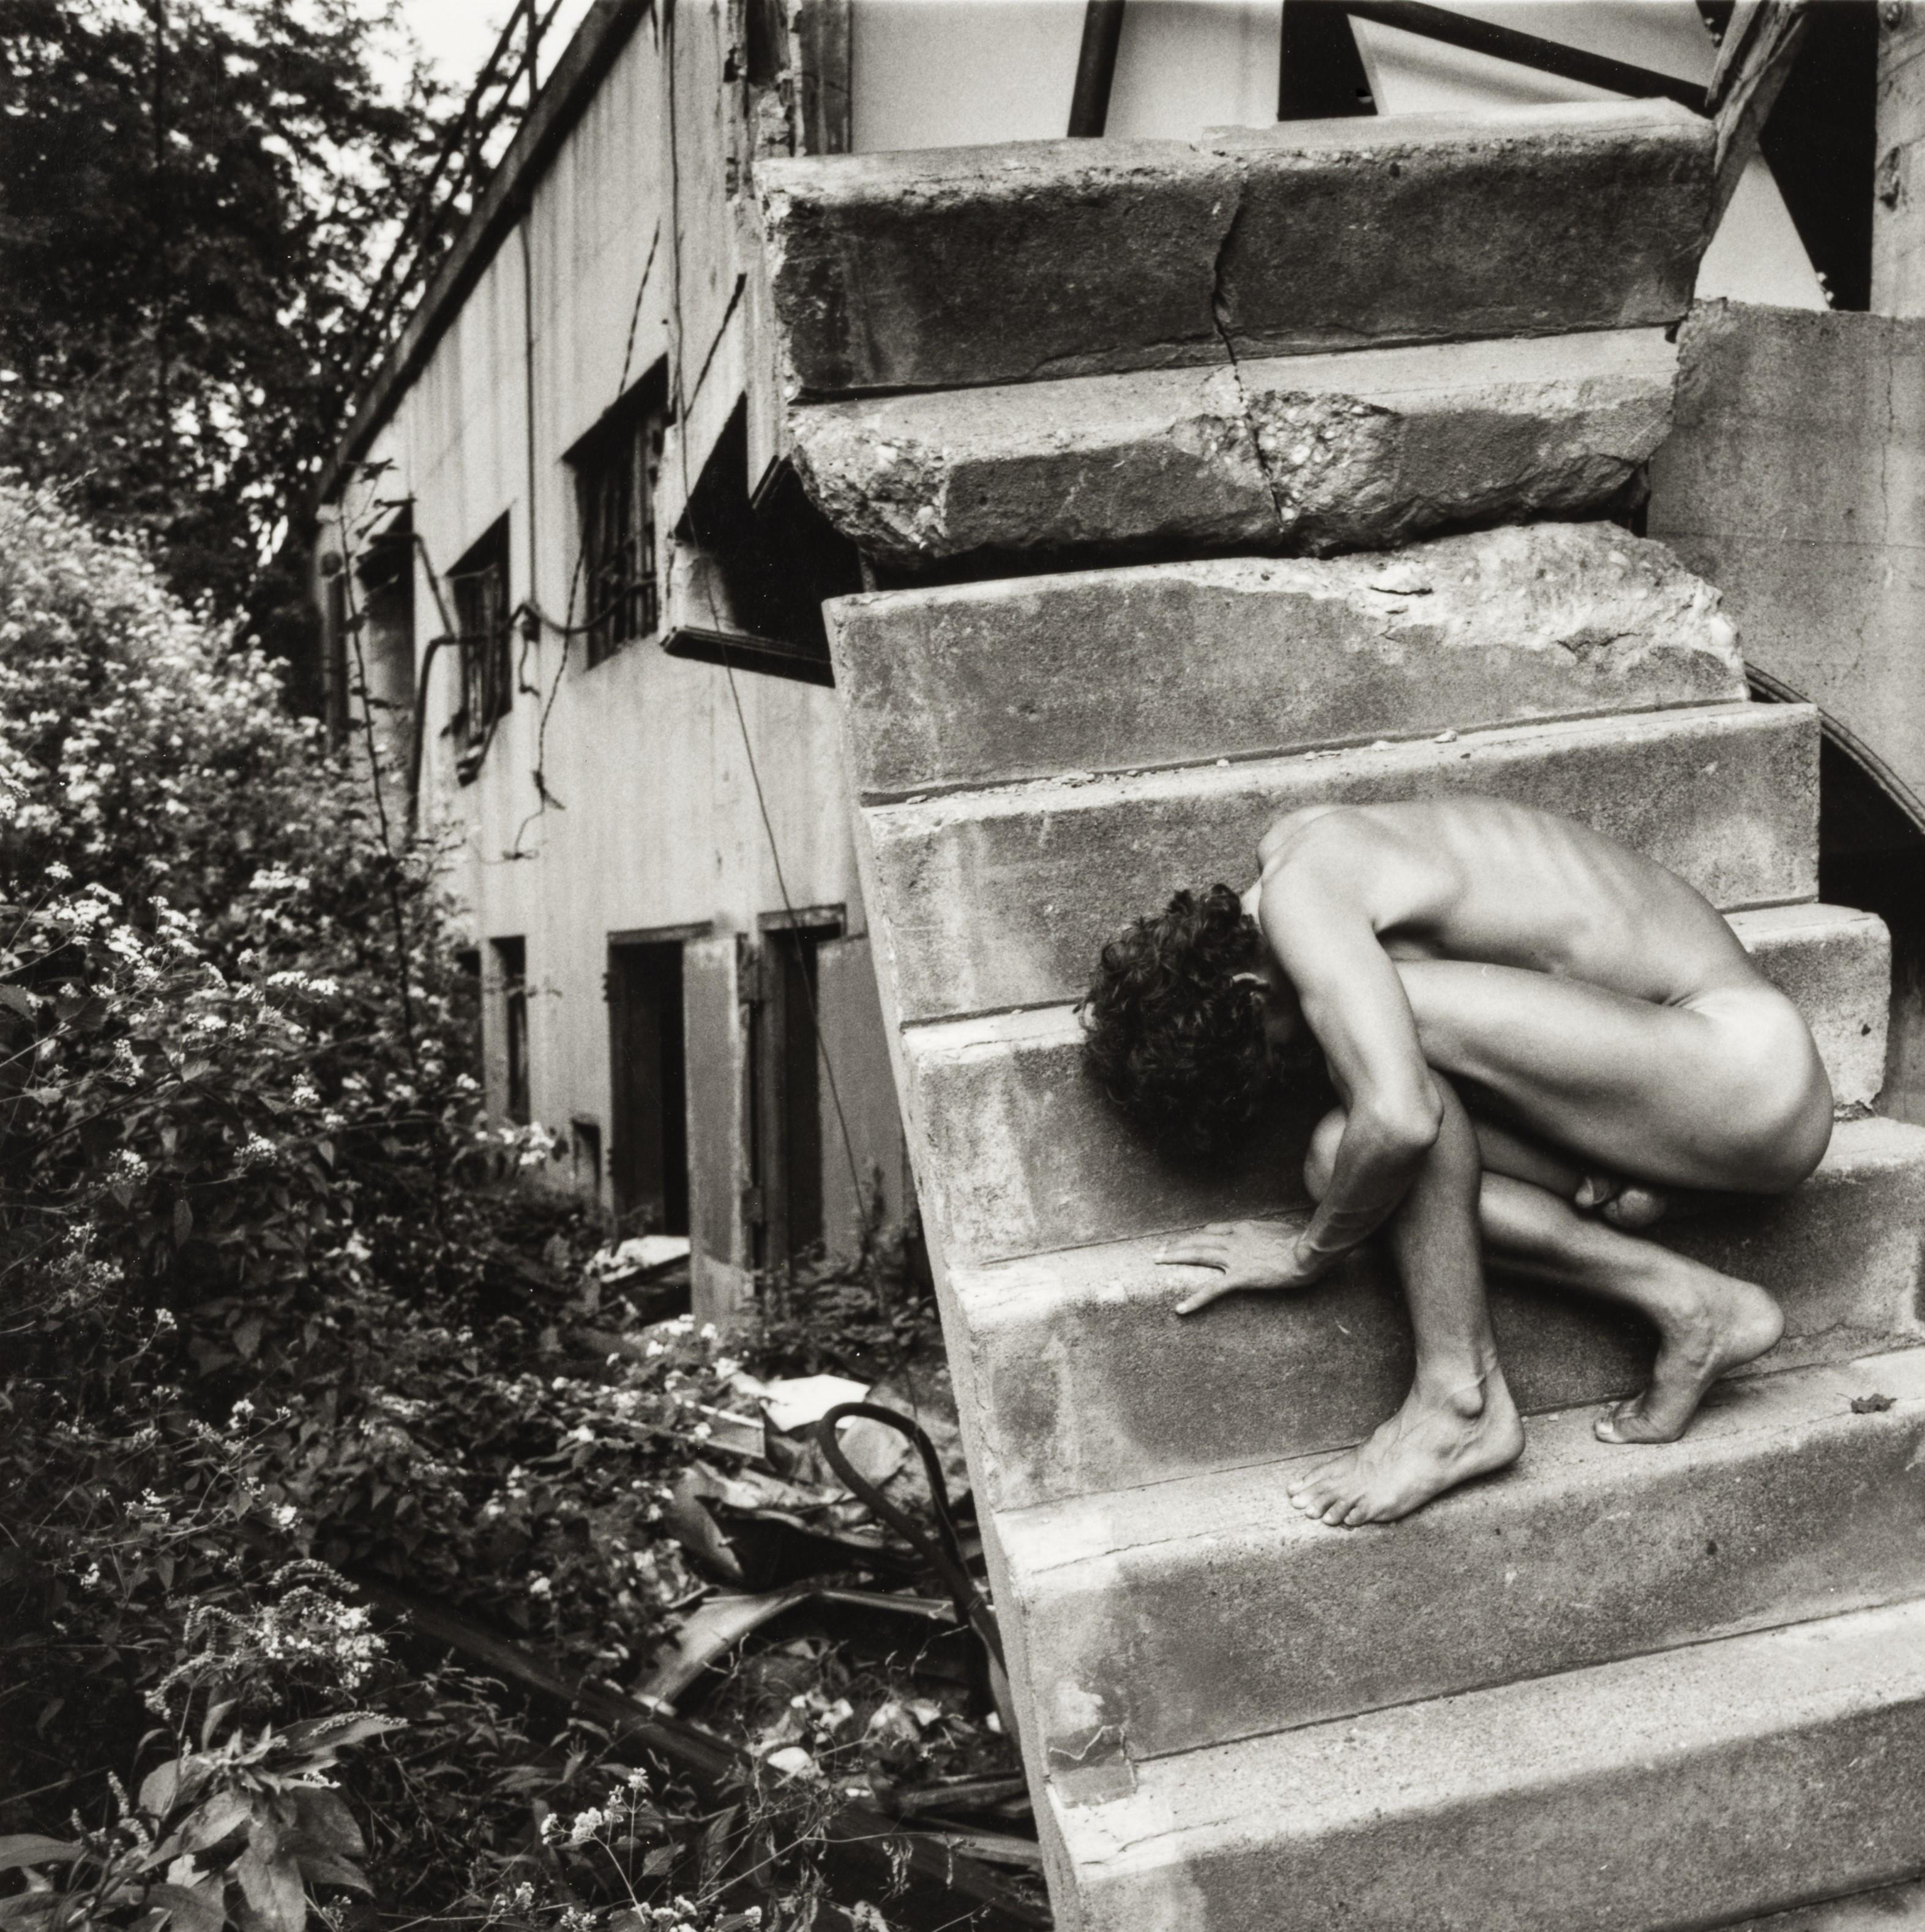 Nude on the Stairs - Surrealist Photograph by Arthur Tress